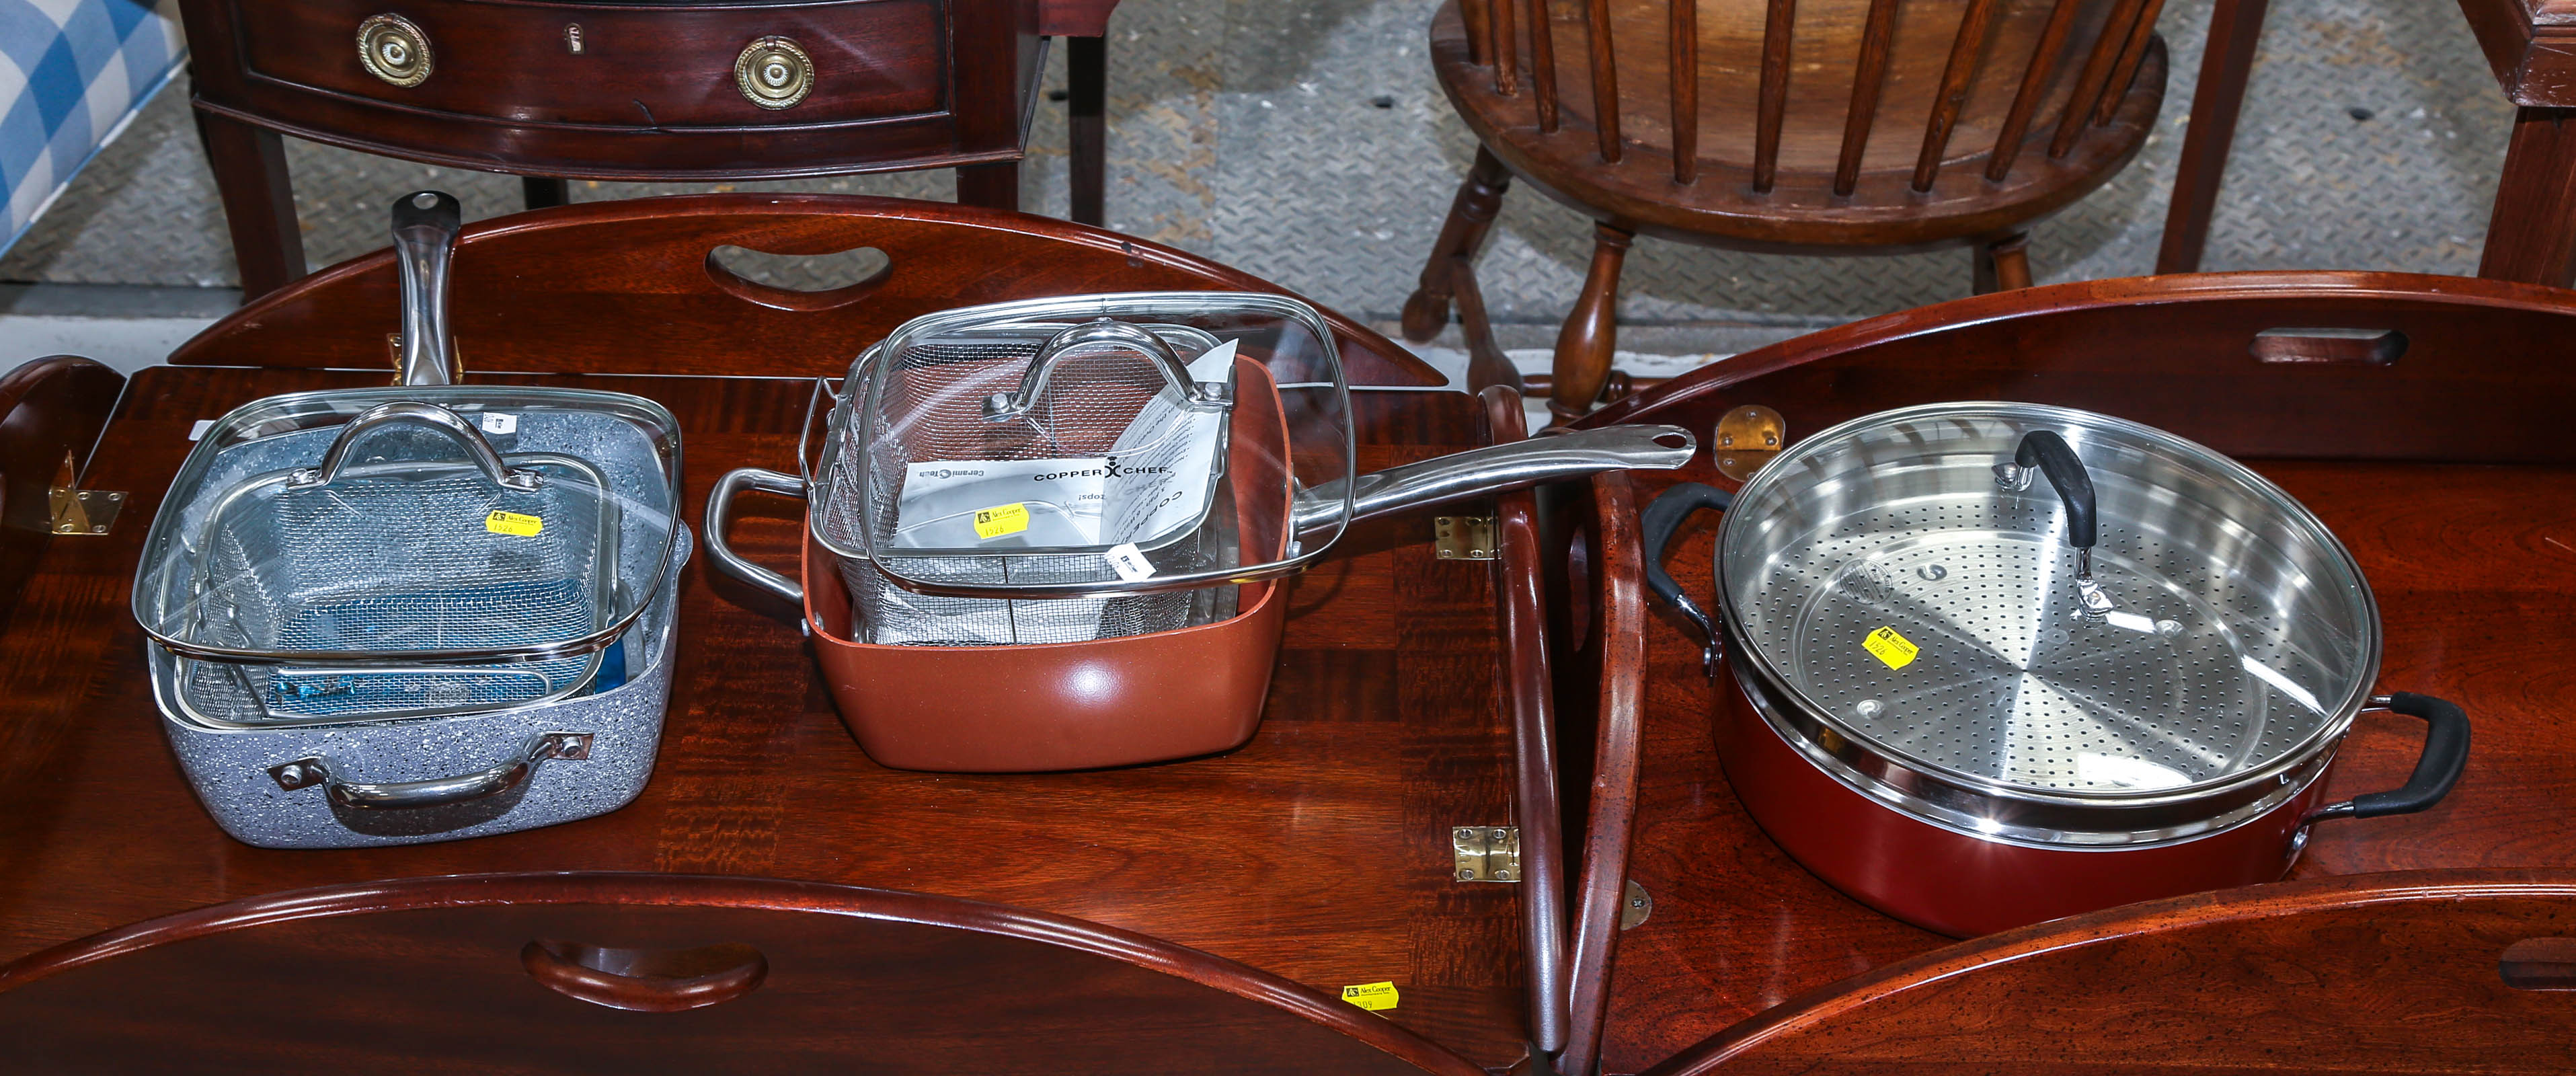 ASSORTMENT OF UNUSED COOKWARE Including